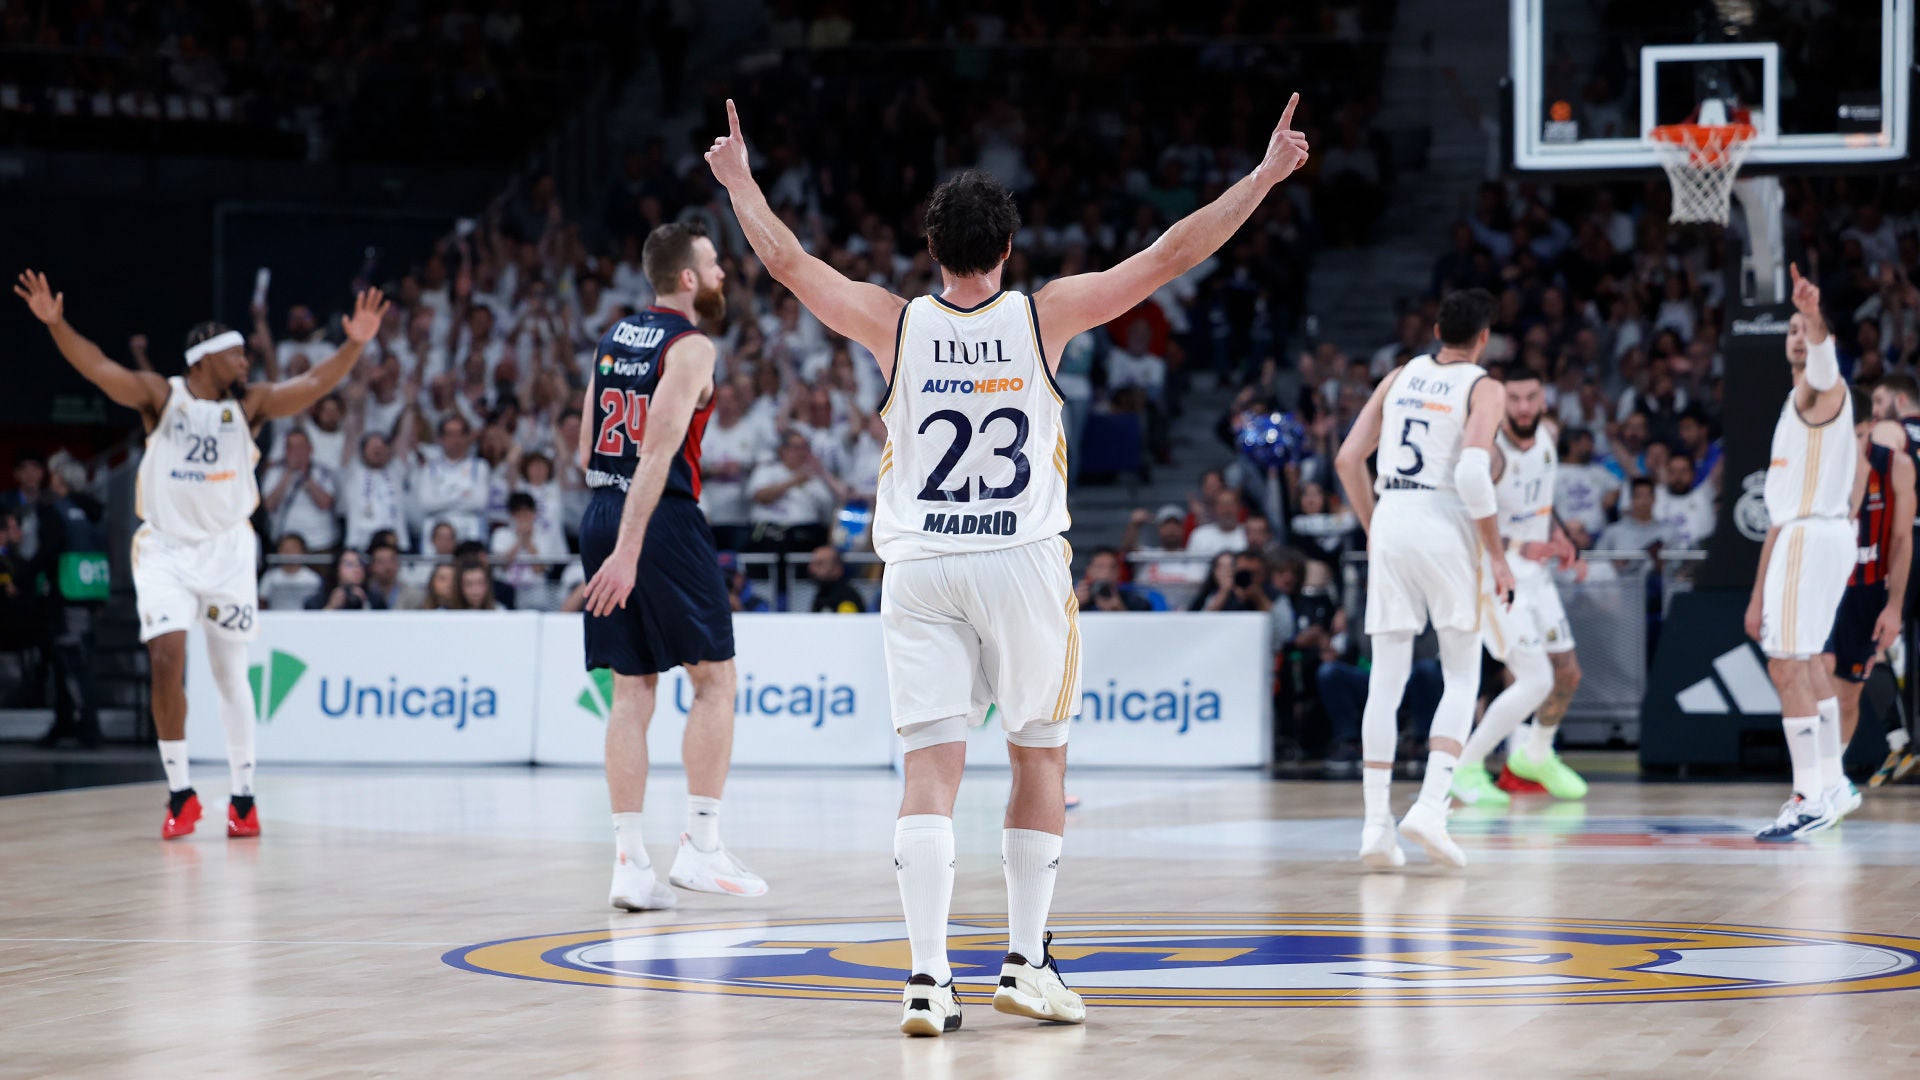 Madrid take a 1-0 lead in the playoff led by record-breaking Llull